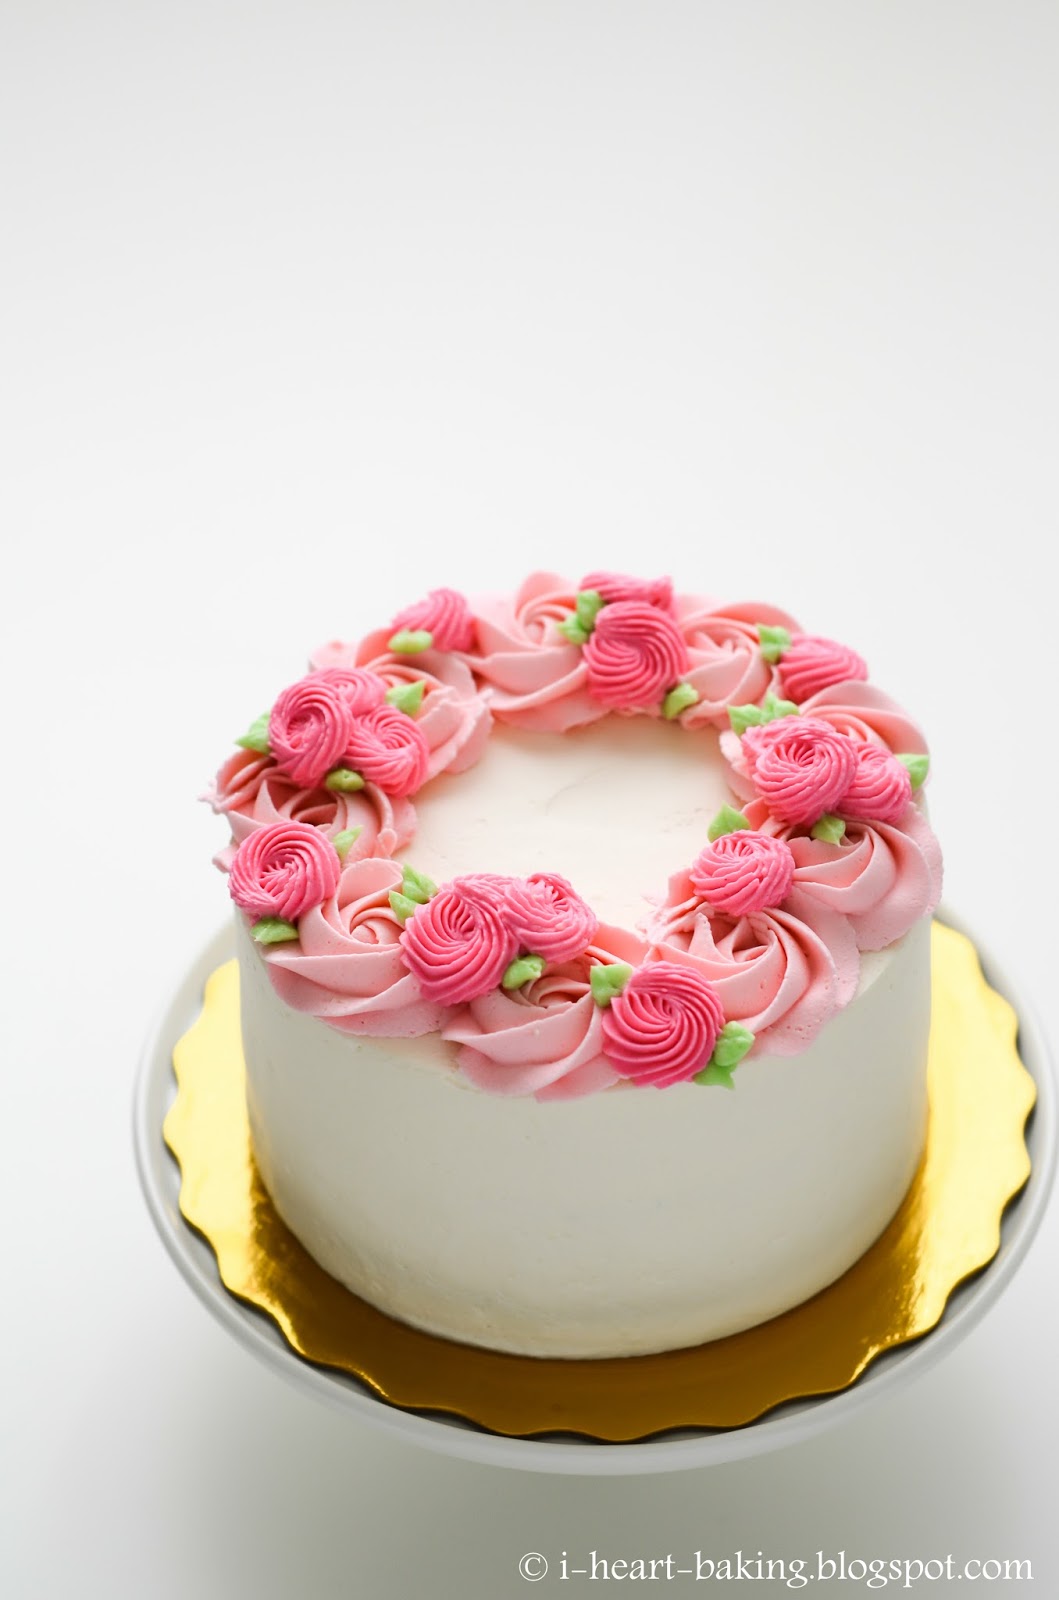 i heart baking!: floral wreath cake for mother's day